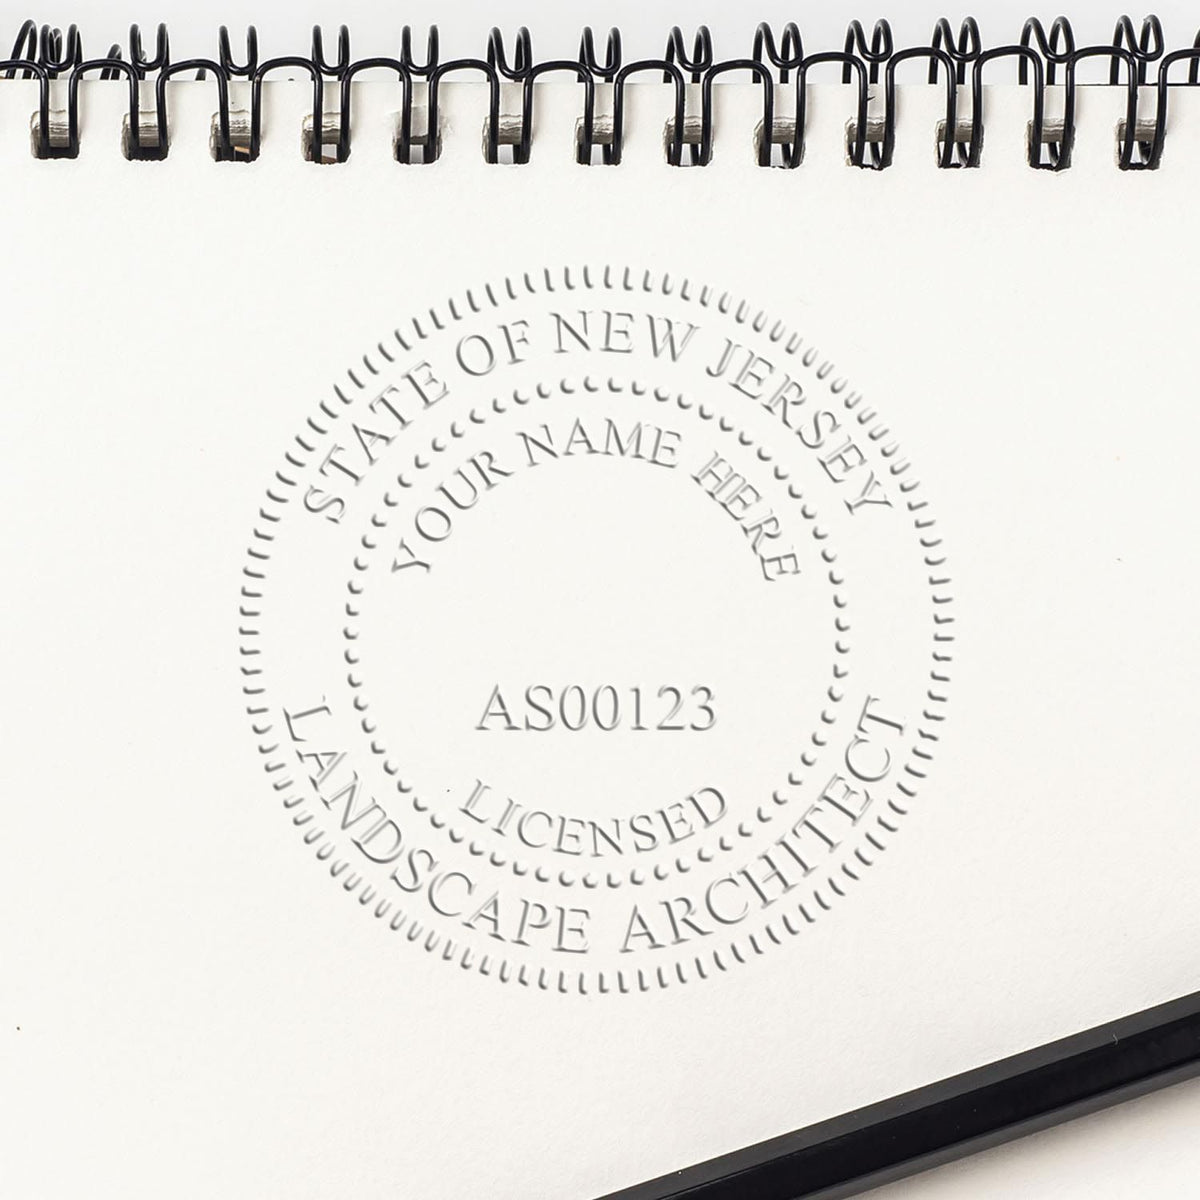 The Gift New Jersey Landscape Architect Seal stamp impression comes to life with a crisp, detailed image stamped on paper - showcasing true professional quality.